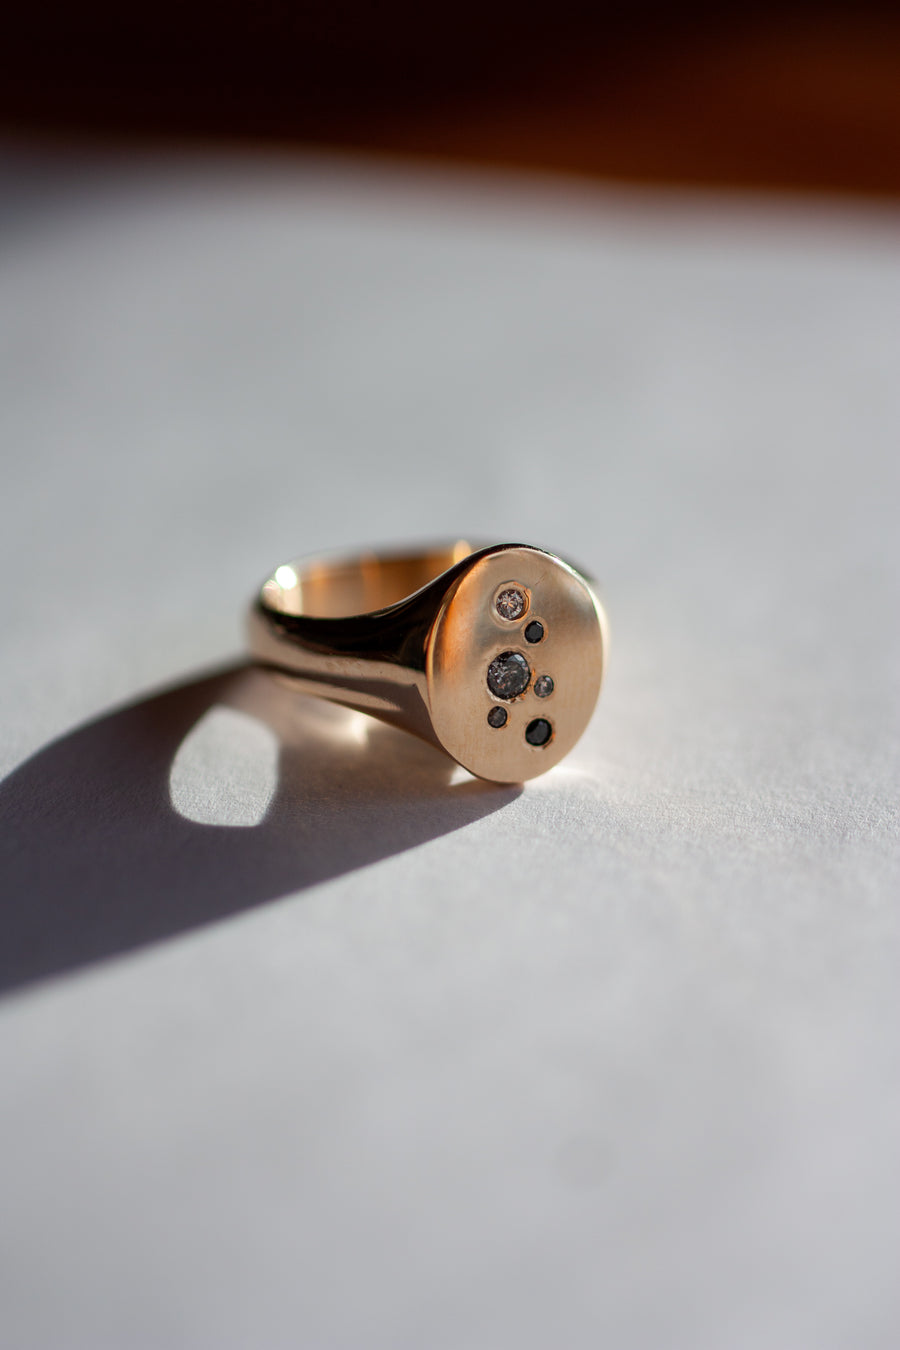 Chunky 14k gold ring w/ 6 unique diamonds. Made to order.